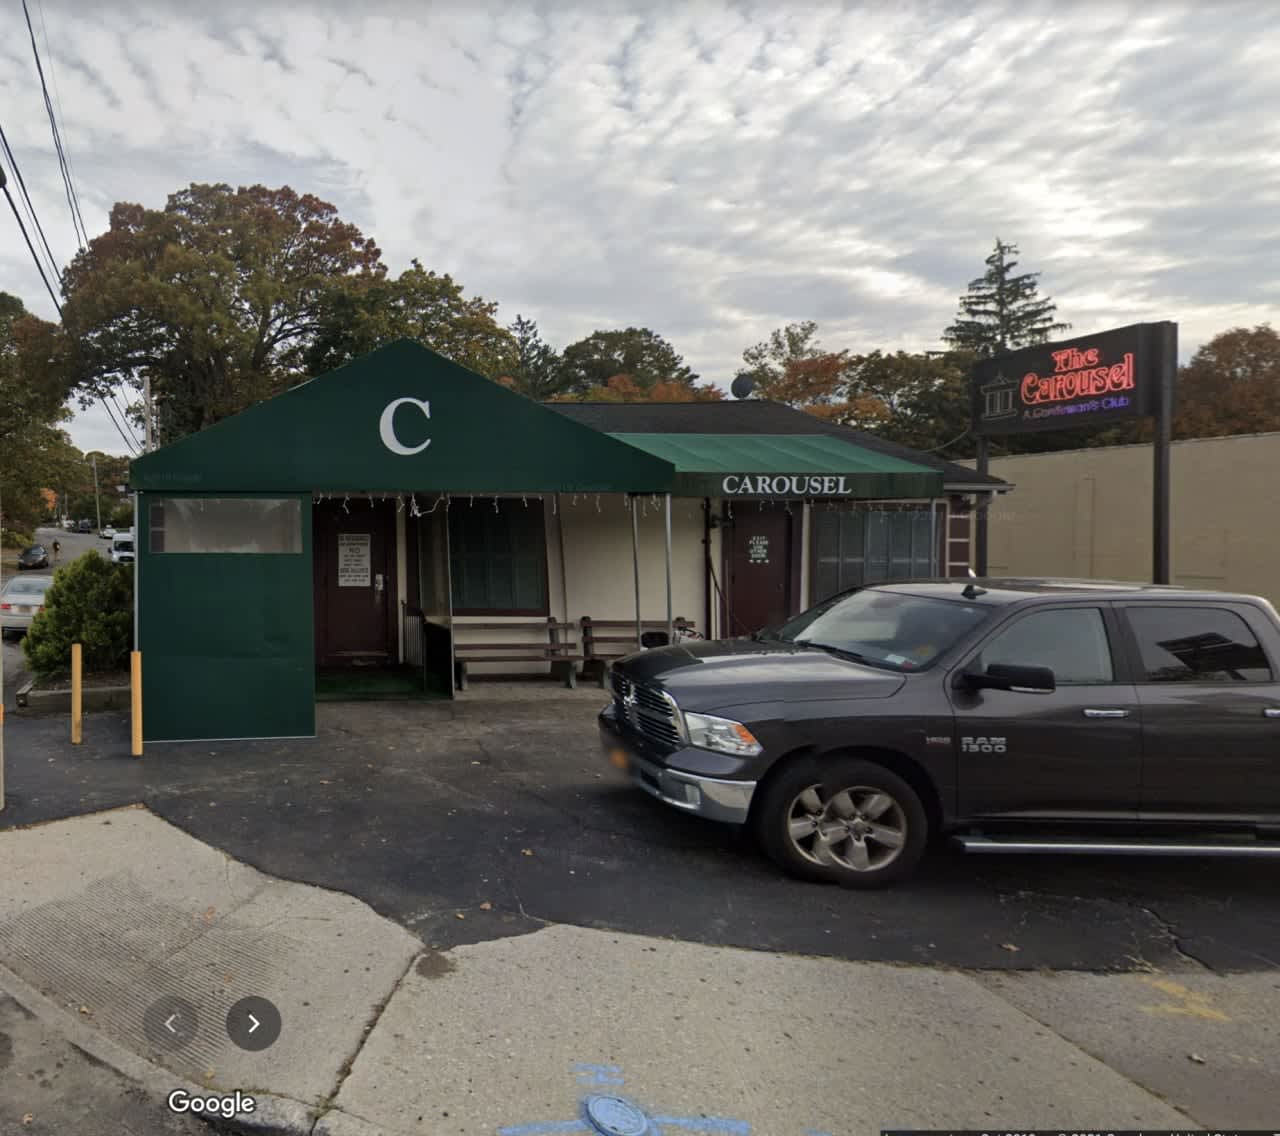 The Carousel was one of three restaurants/bars cited or closed for state liquor license violations.